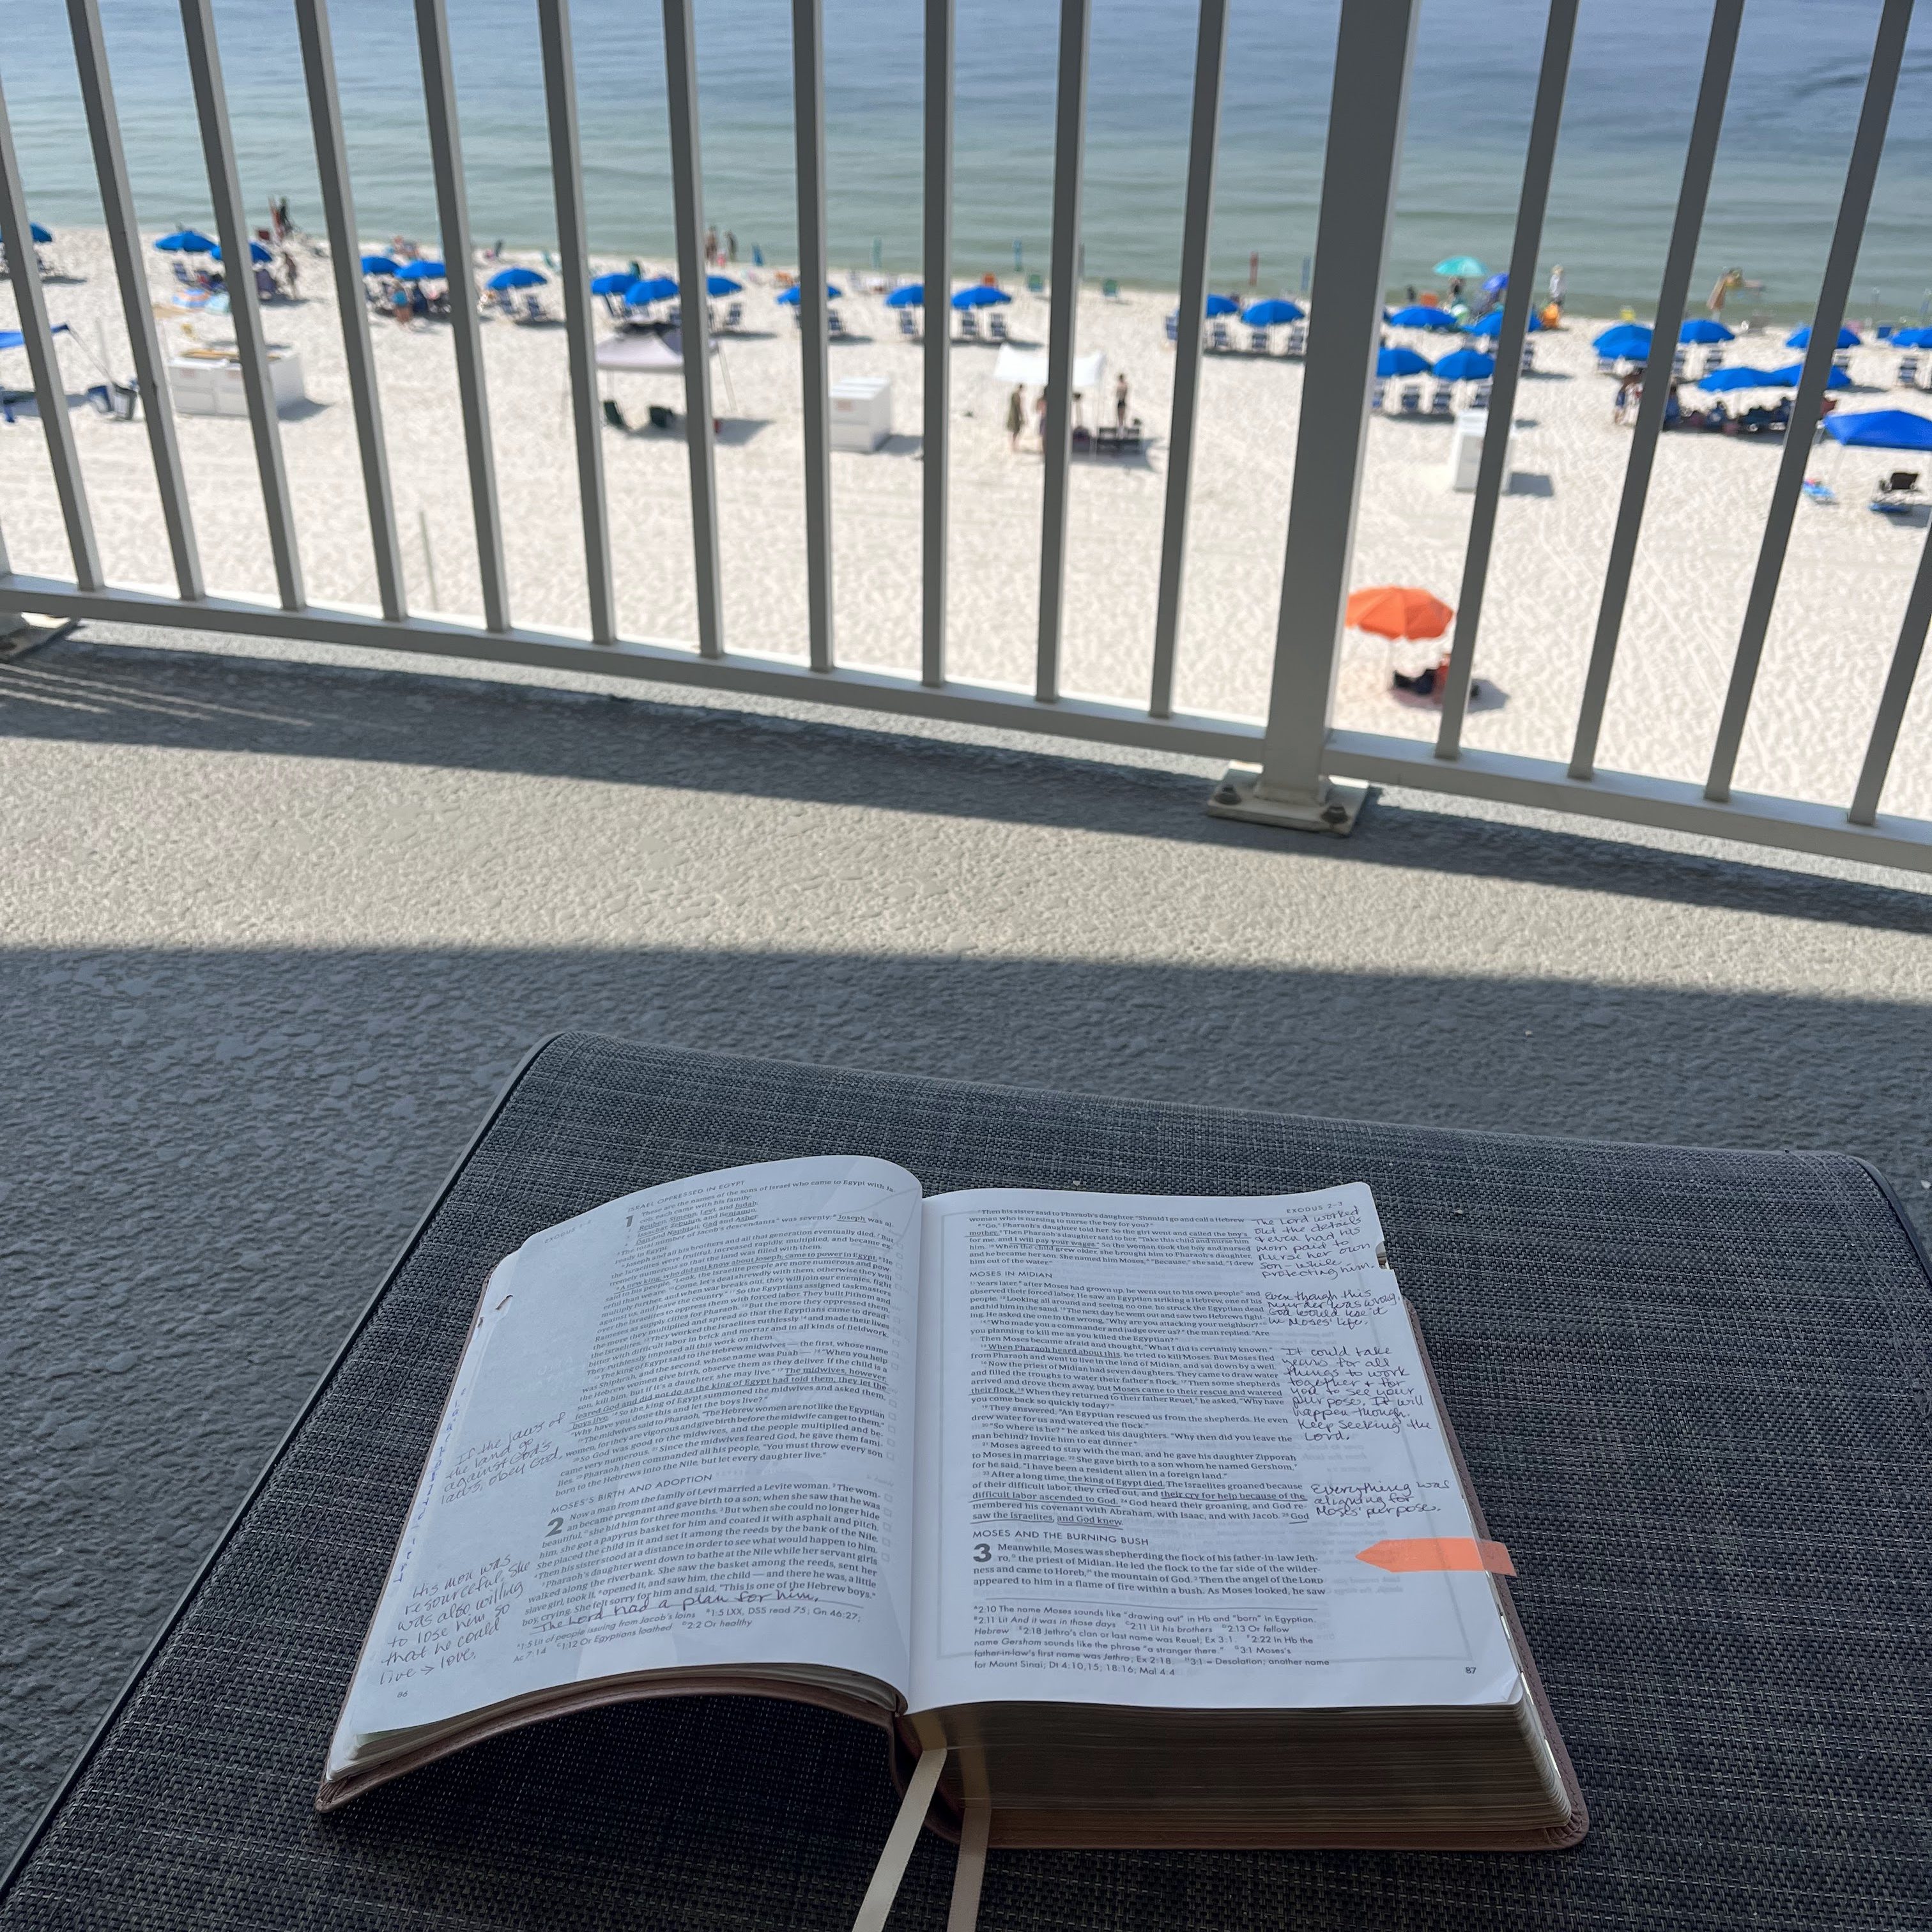 Reading the Bible for Life Applications at the beach